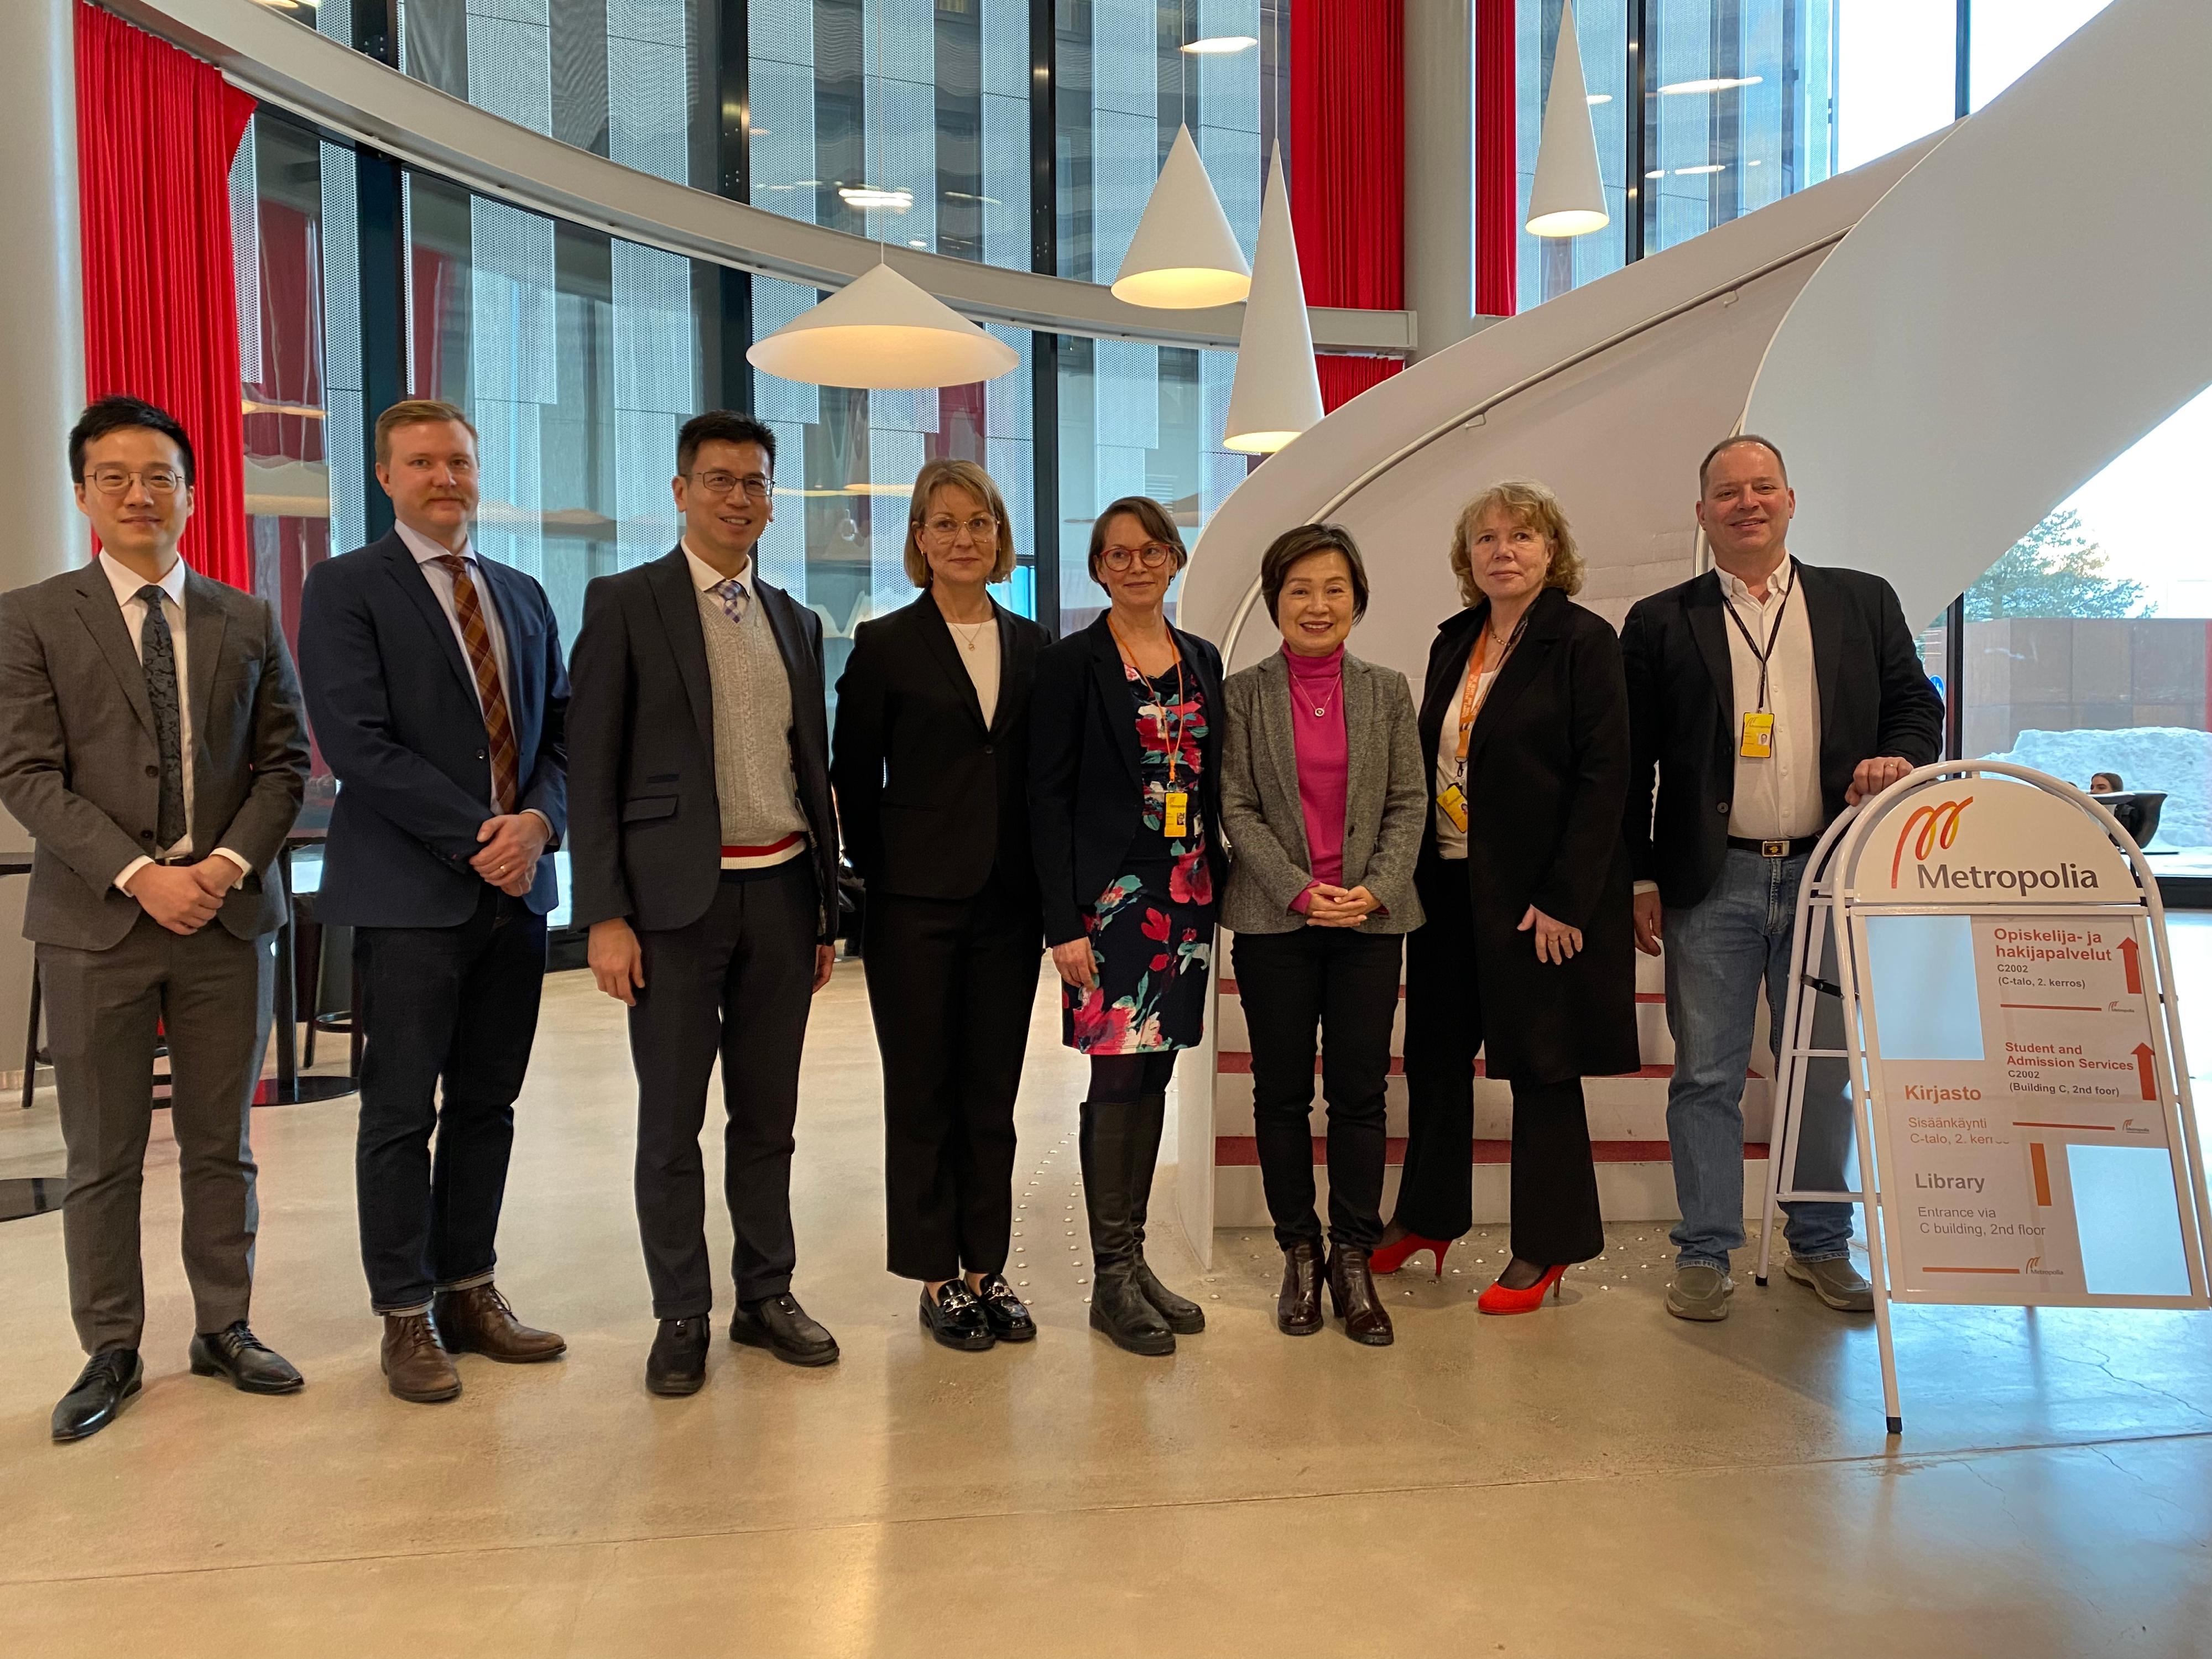 The Secretary for Education, Dr Choi Yuk-lin (third right), accompanied by the Director-General of the Hong Kong Economic and Trade Office, London, Mr Gilford Law (third left), visited Metropolia University of Applied Sciences, the largest university of applied sciences in Finland, in Helsinki, Finland, on January 26 (Helsinki time).